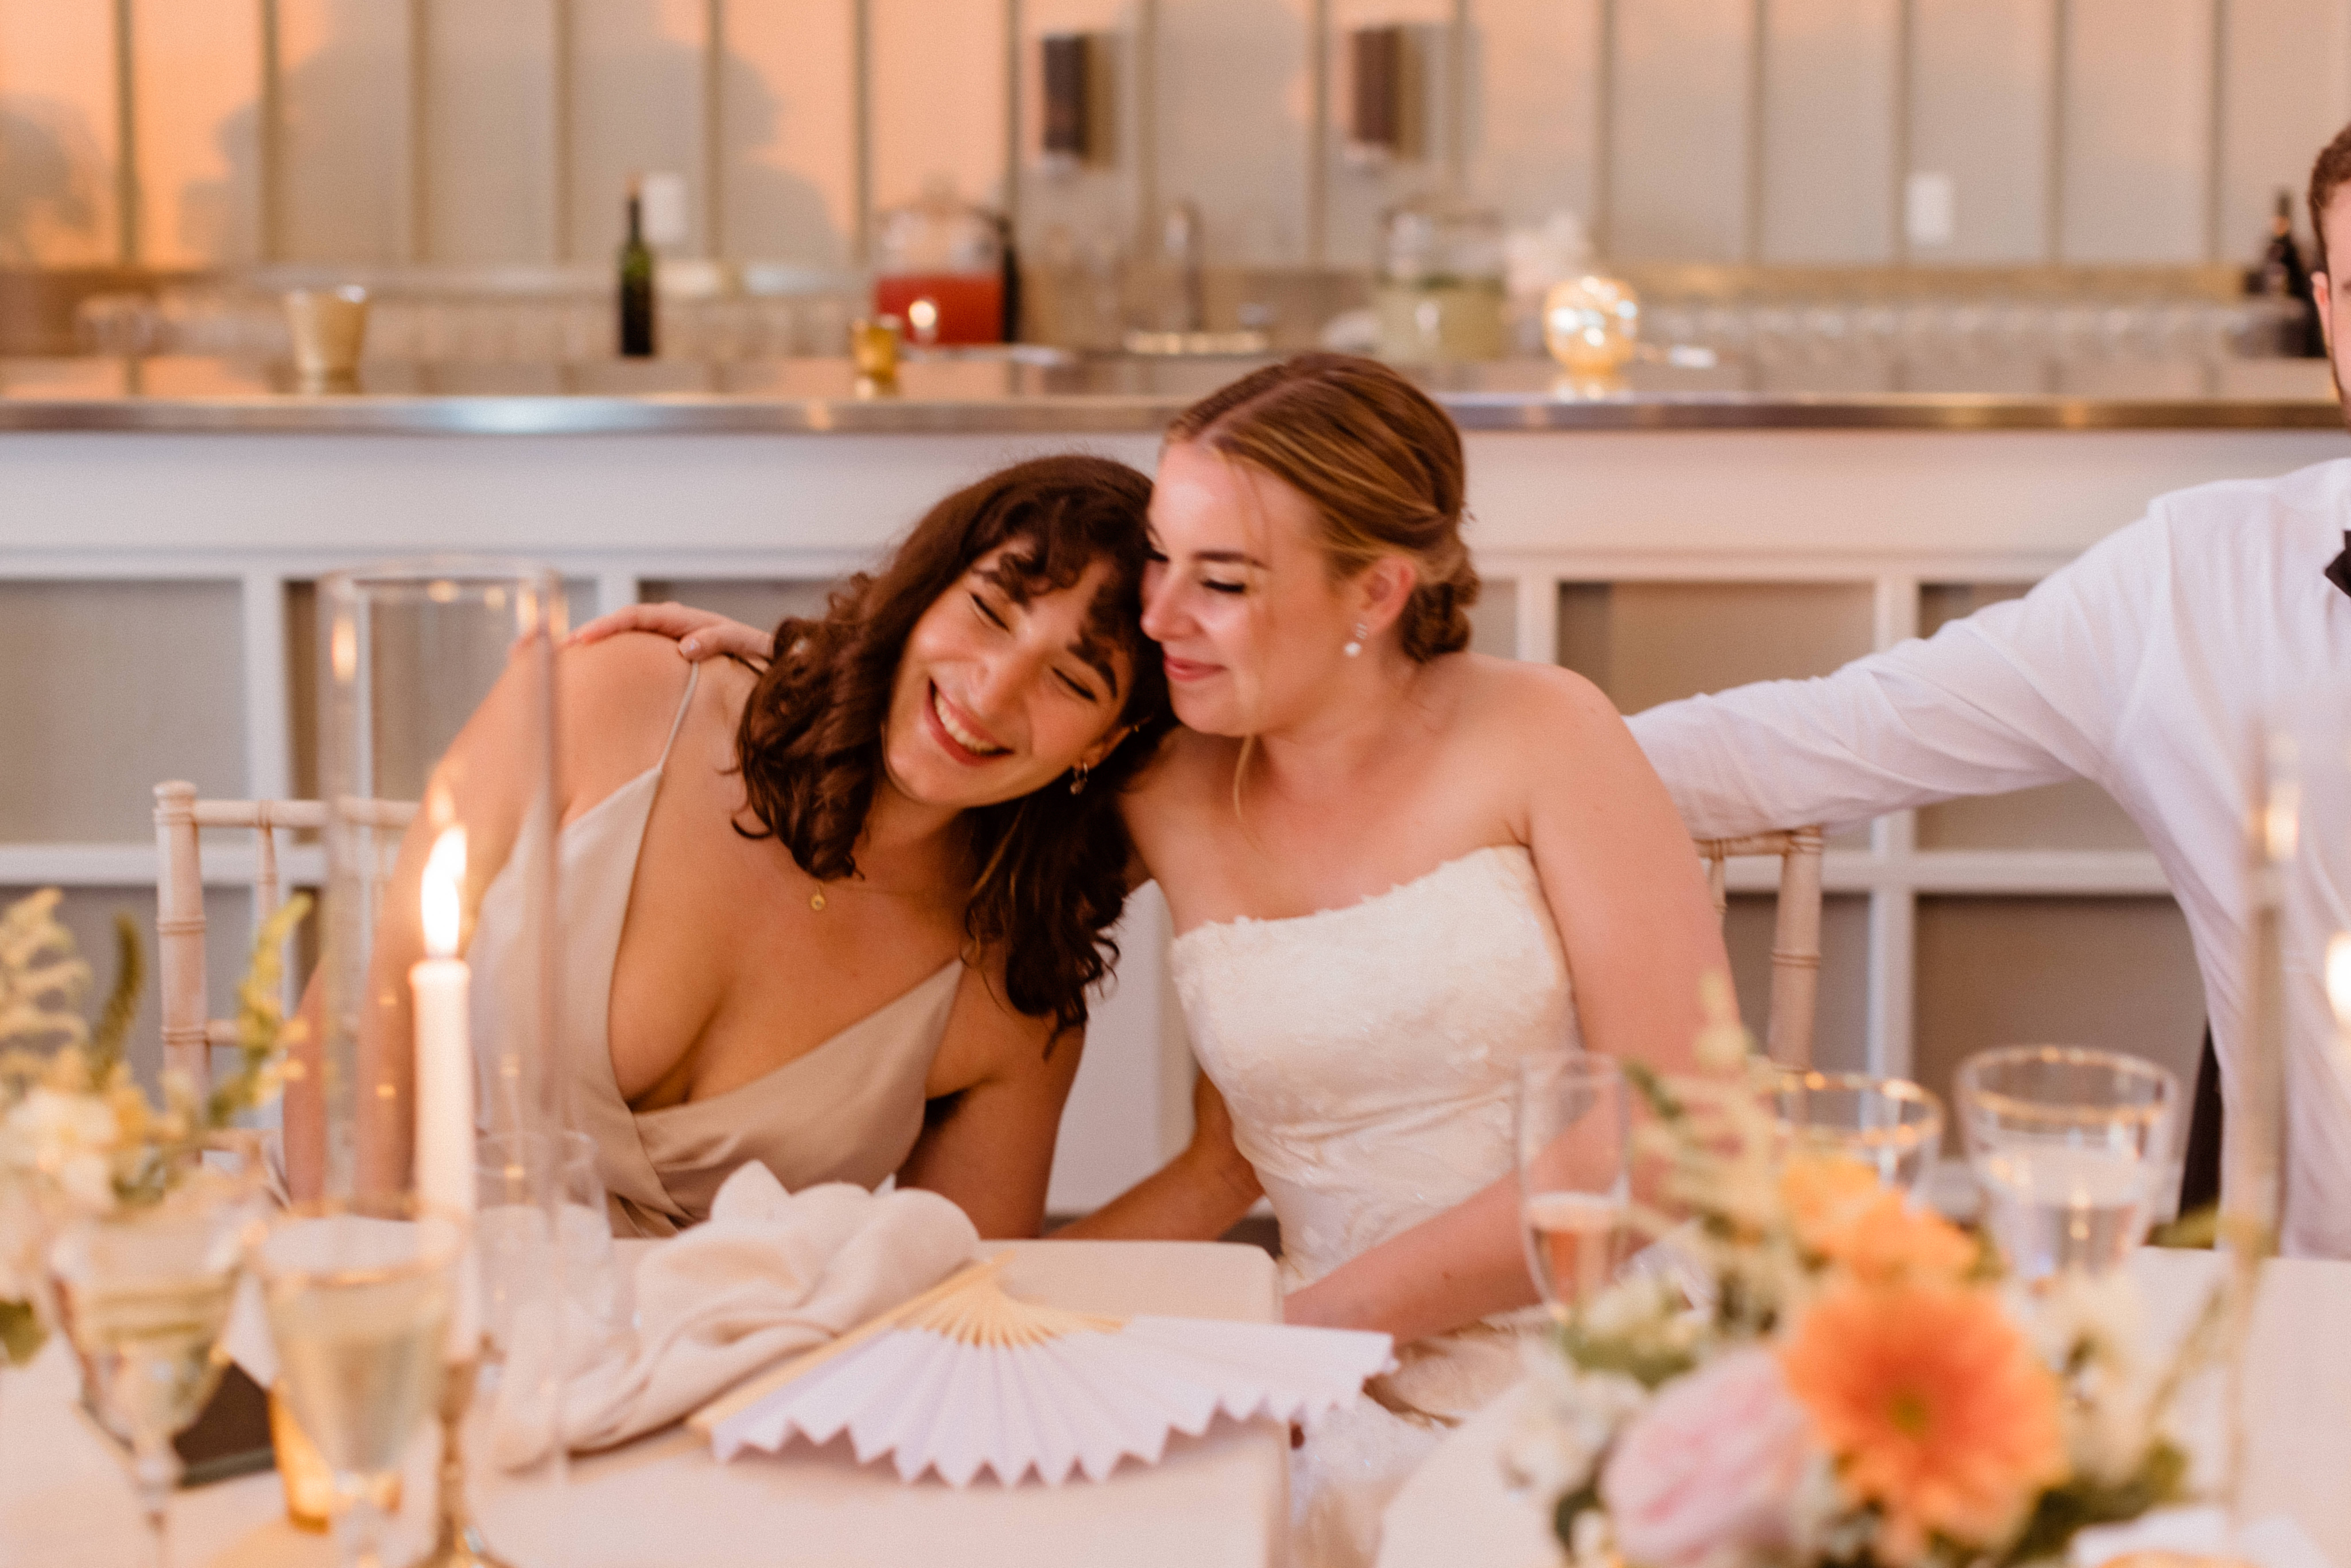 Bride embraces a bridesmaid during the dreamy New York winery wedding reception